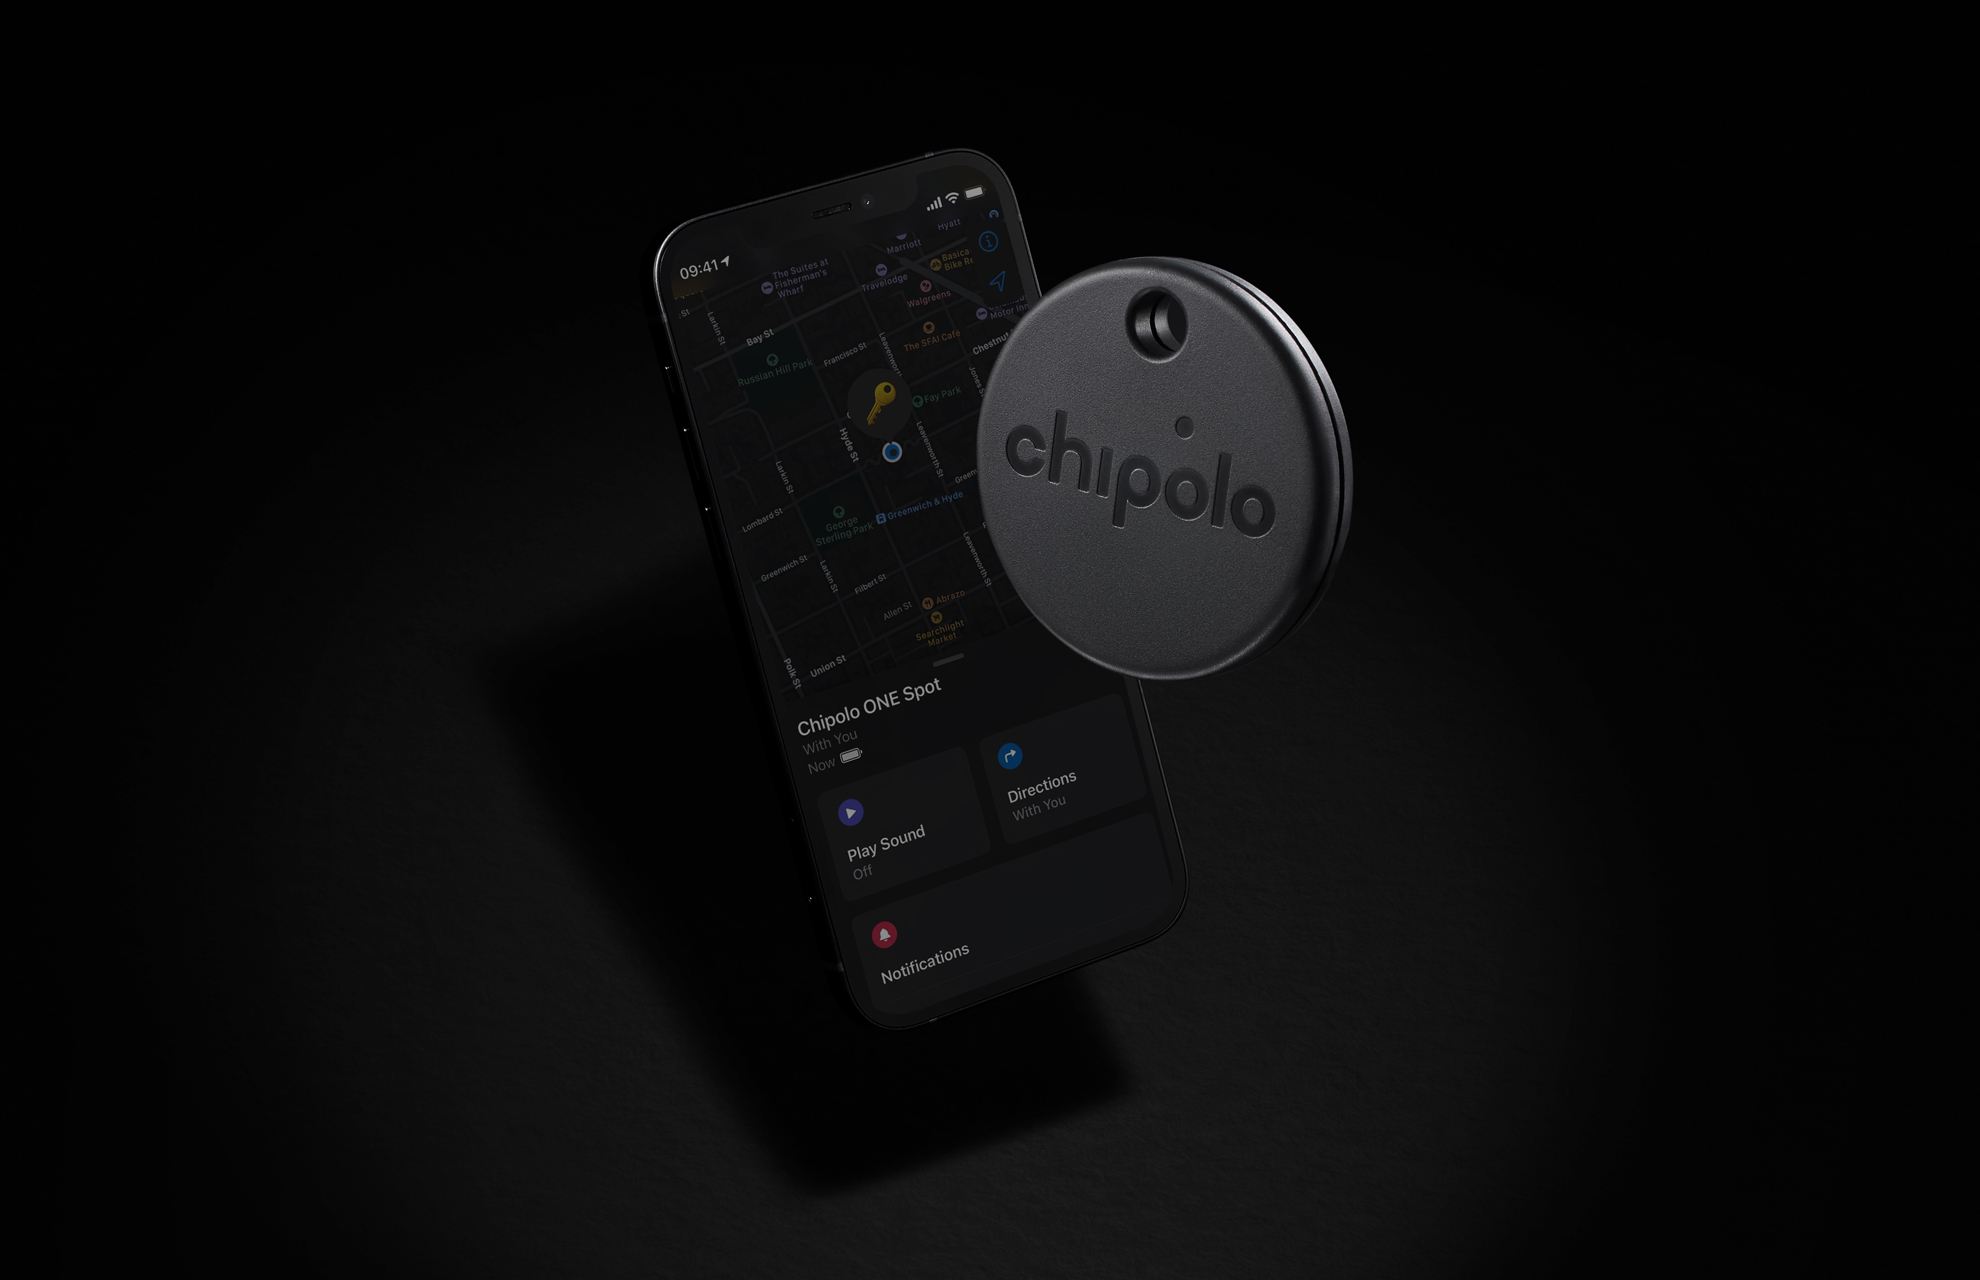 2021 - Works with The Apple Find My Network Chipolo ONE Spot Item Finder with Keyring Hole Almost Black 